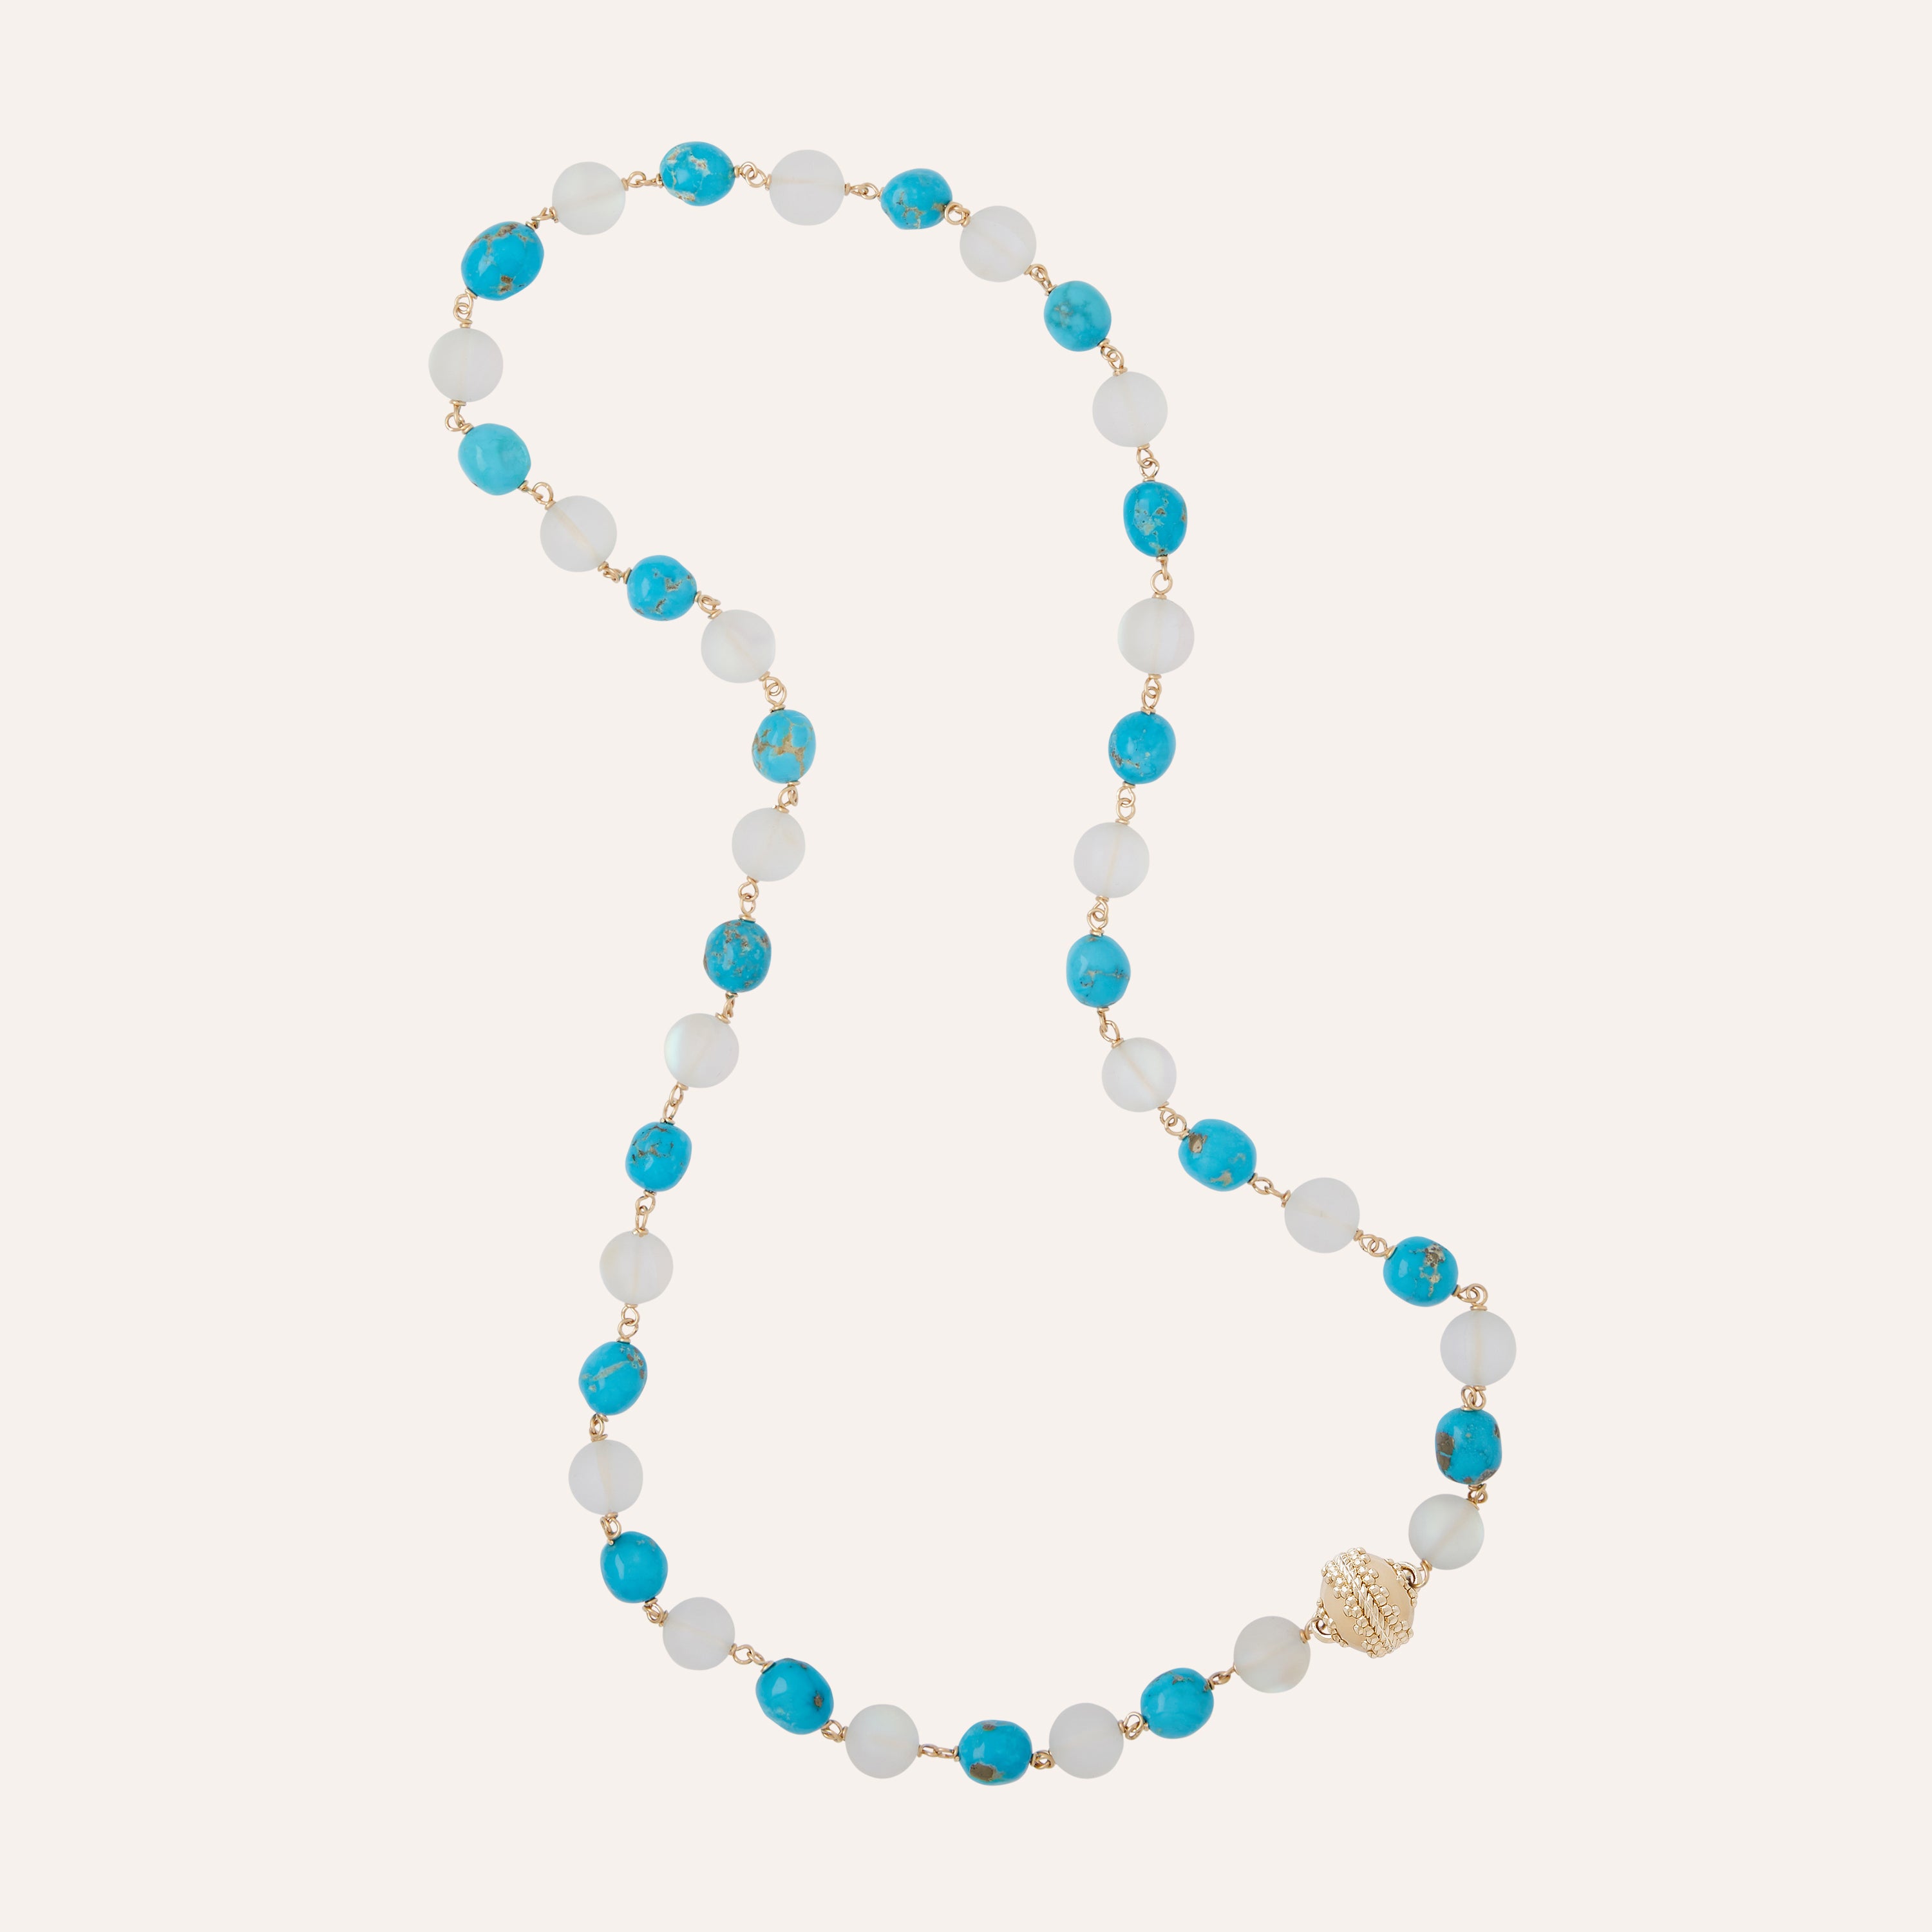 Caspian Sleeping Beauty Turquoise and Iridescent White Glass Necklace